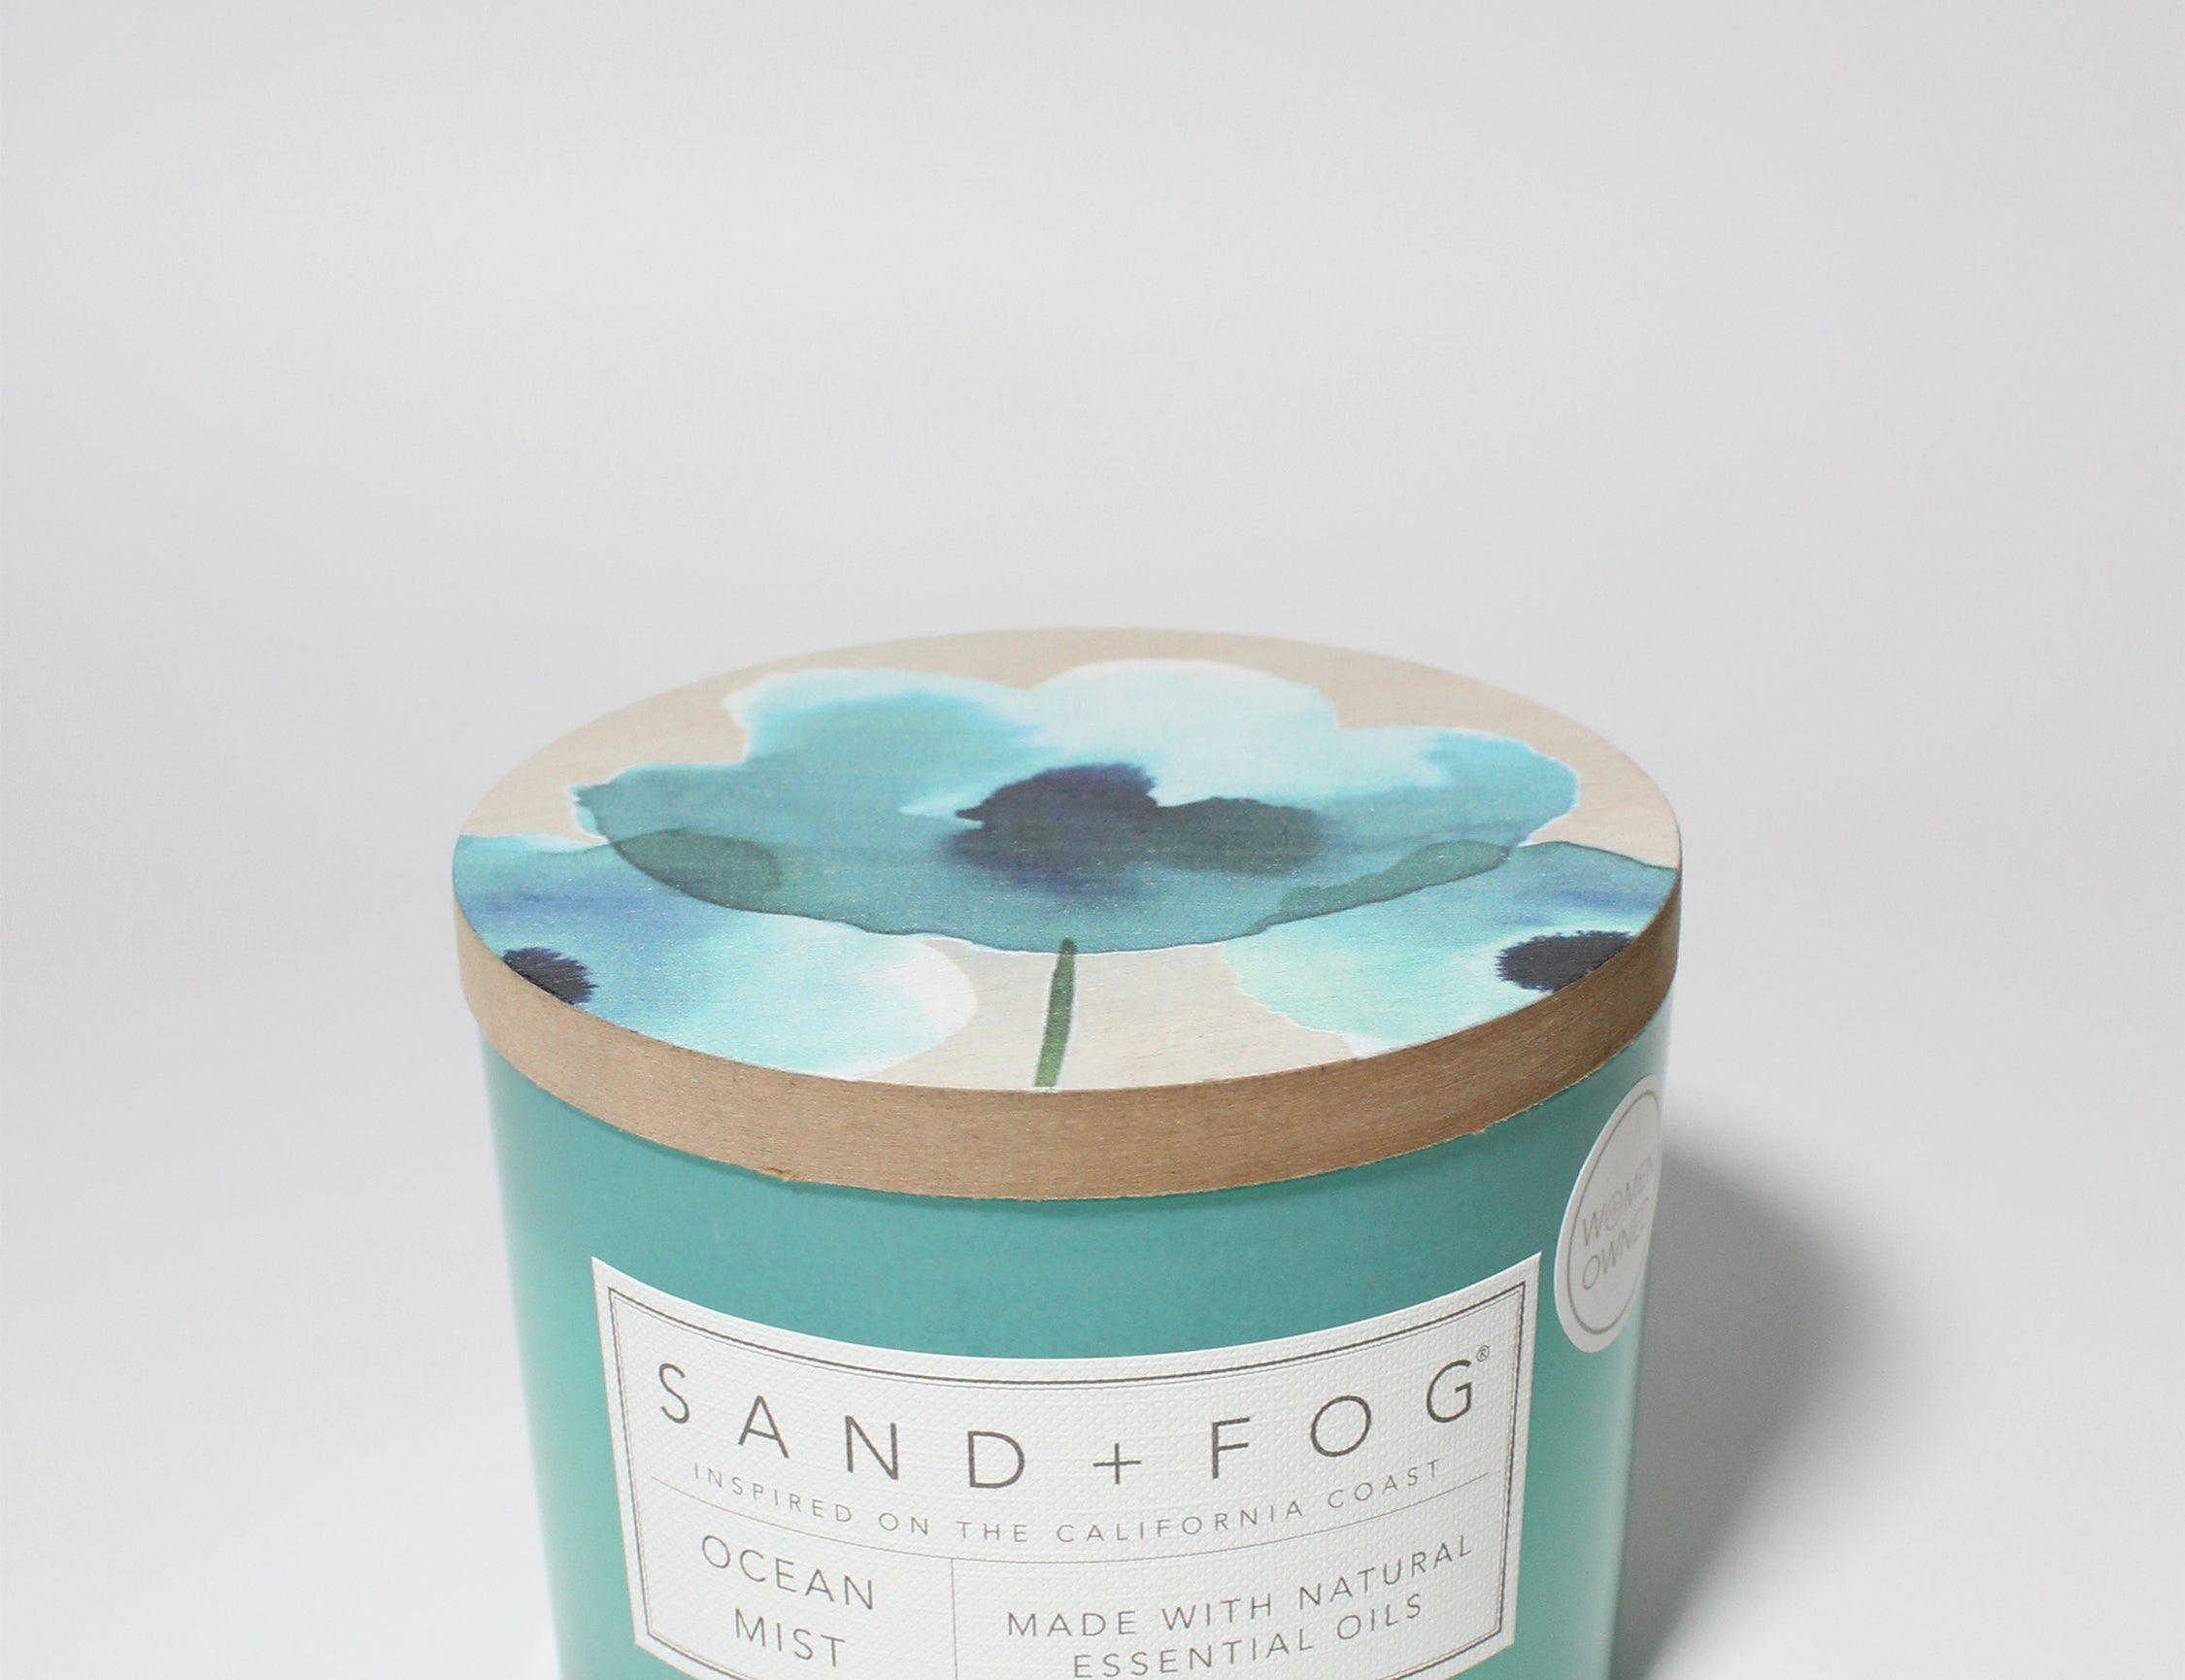 Ocean Mist 12 oz scented candle Aqua vessel with Painted Poppy lid